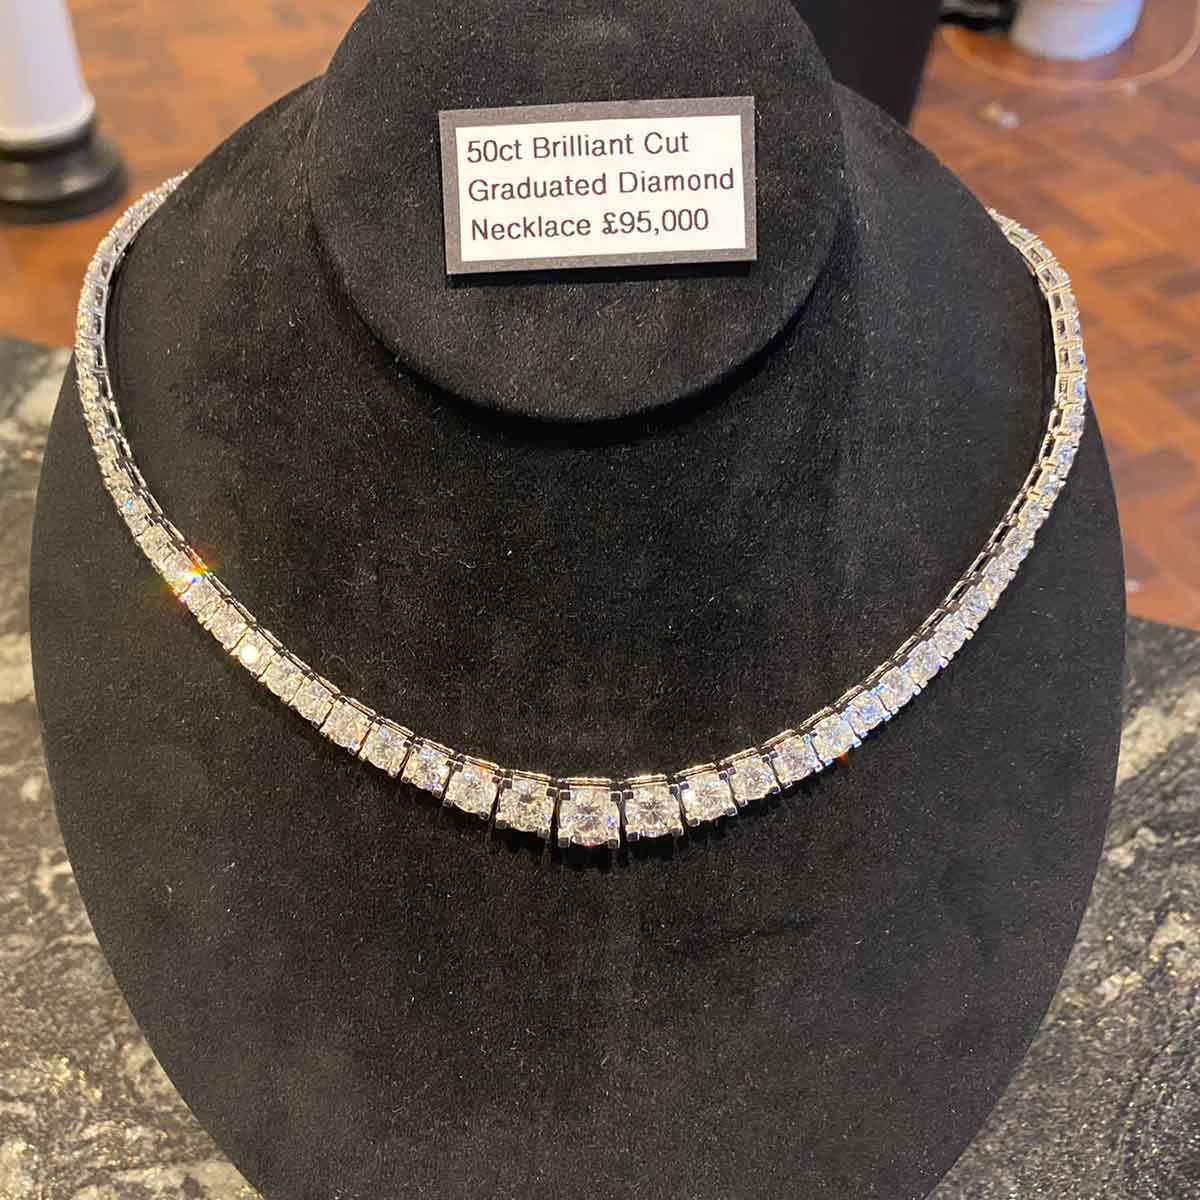 Juels Limited Diamond Necklace